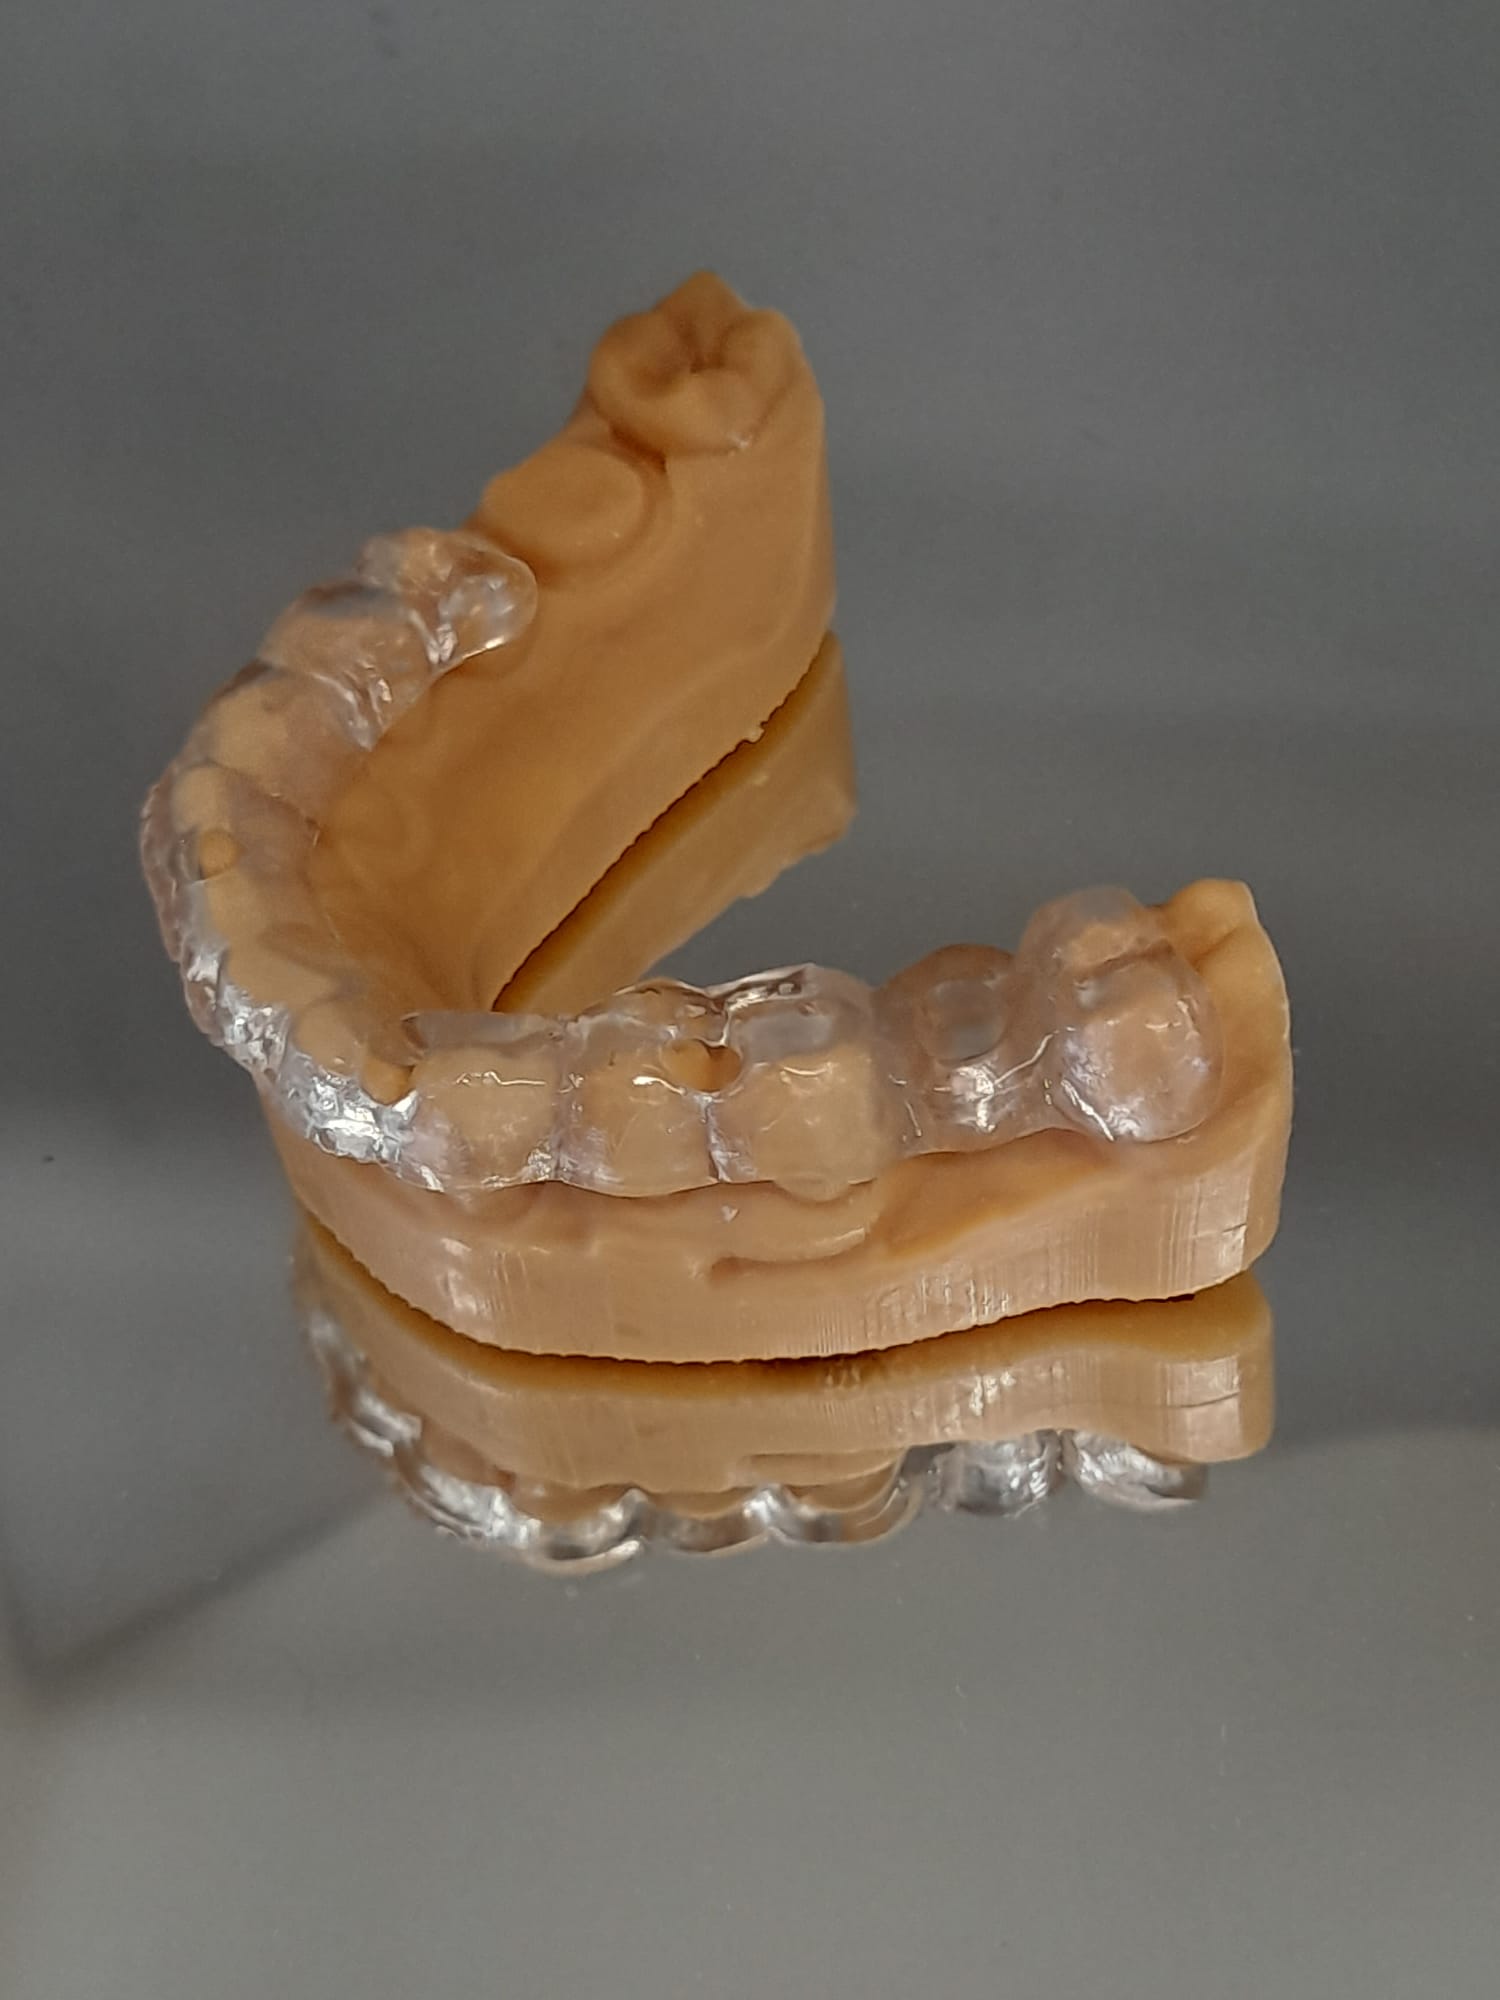 Manufactured to support dentist with accurate implant placement.